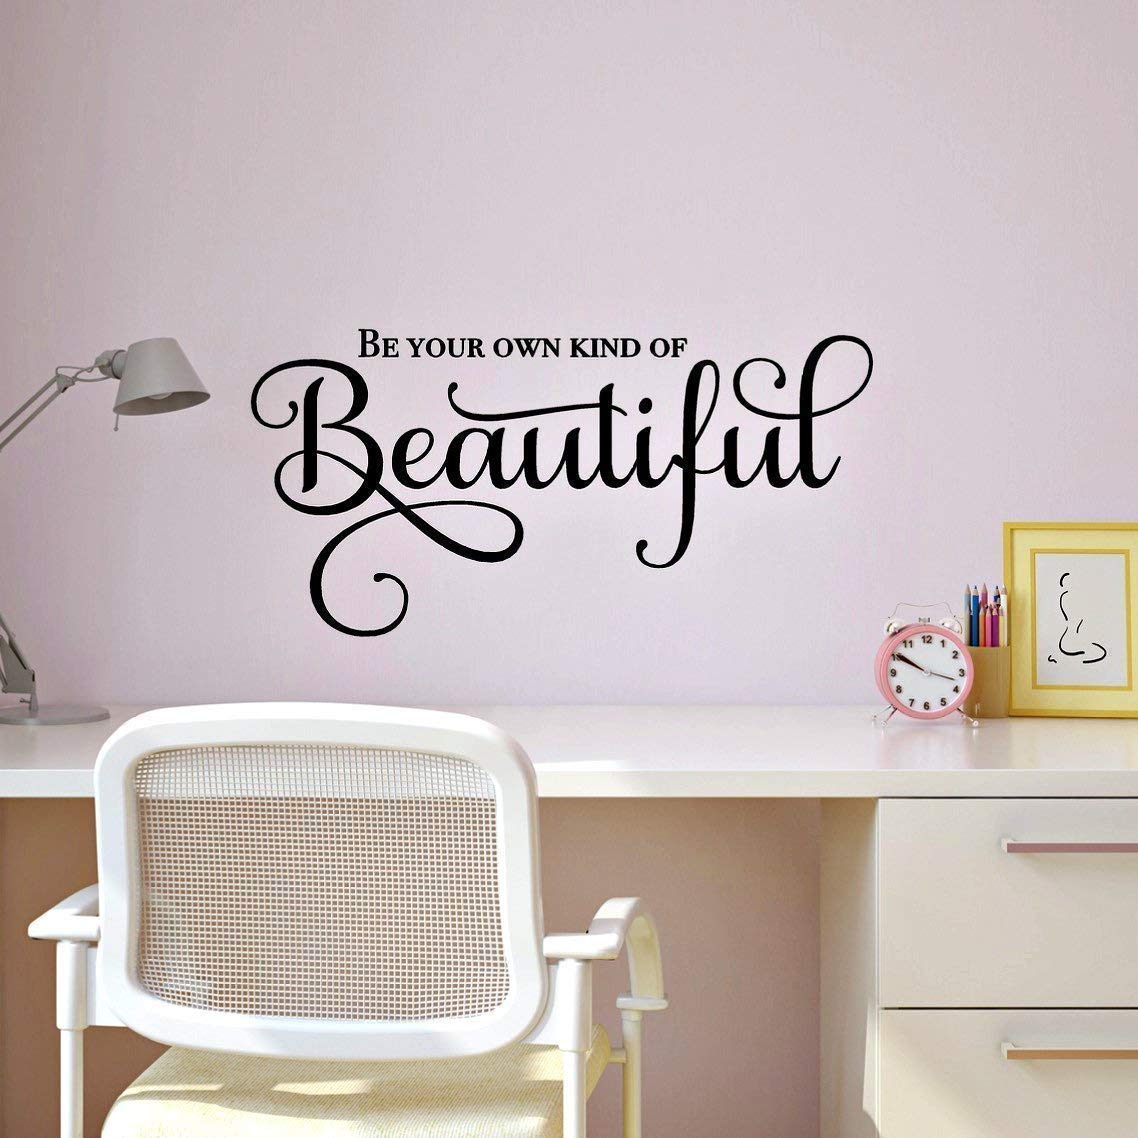 Mirror Decals: Reflection Of Your Style